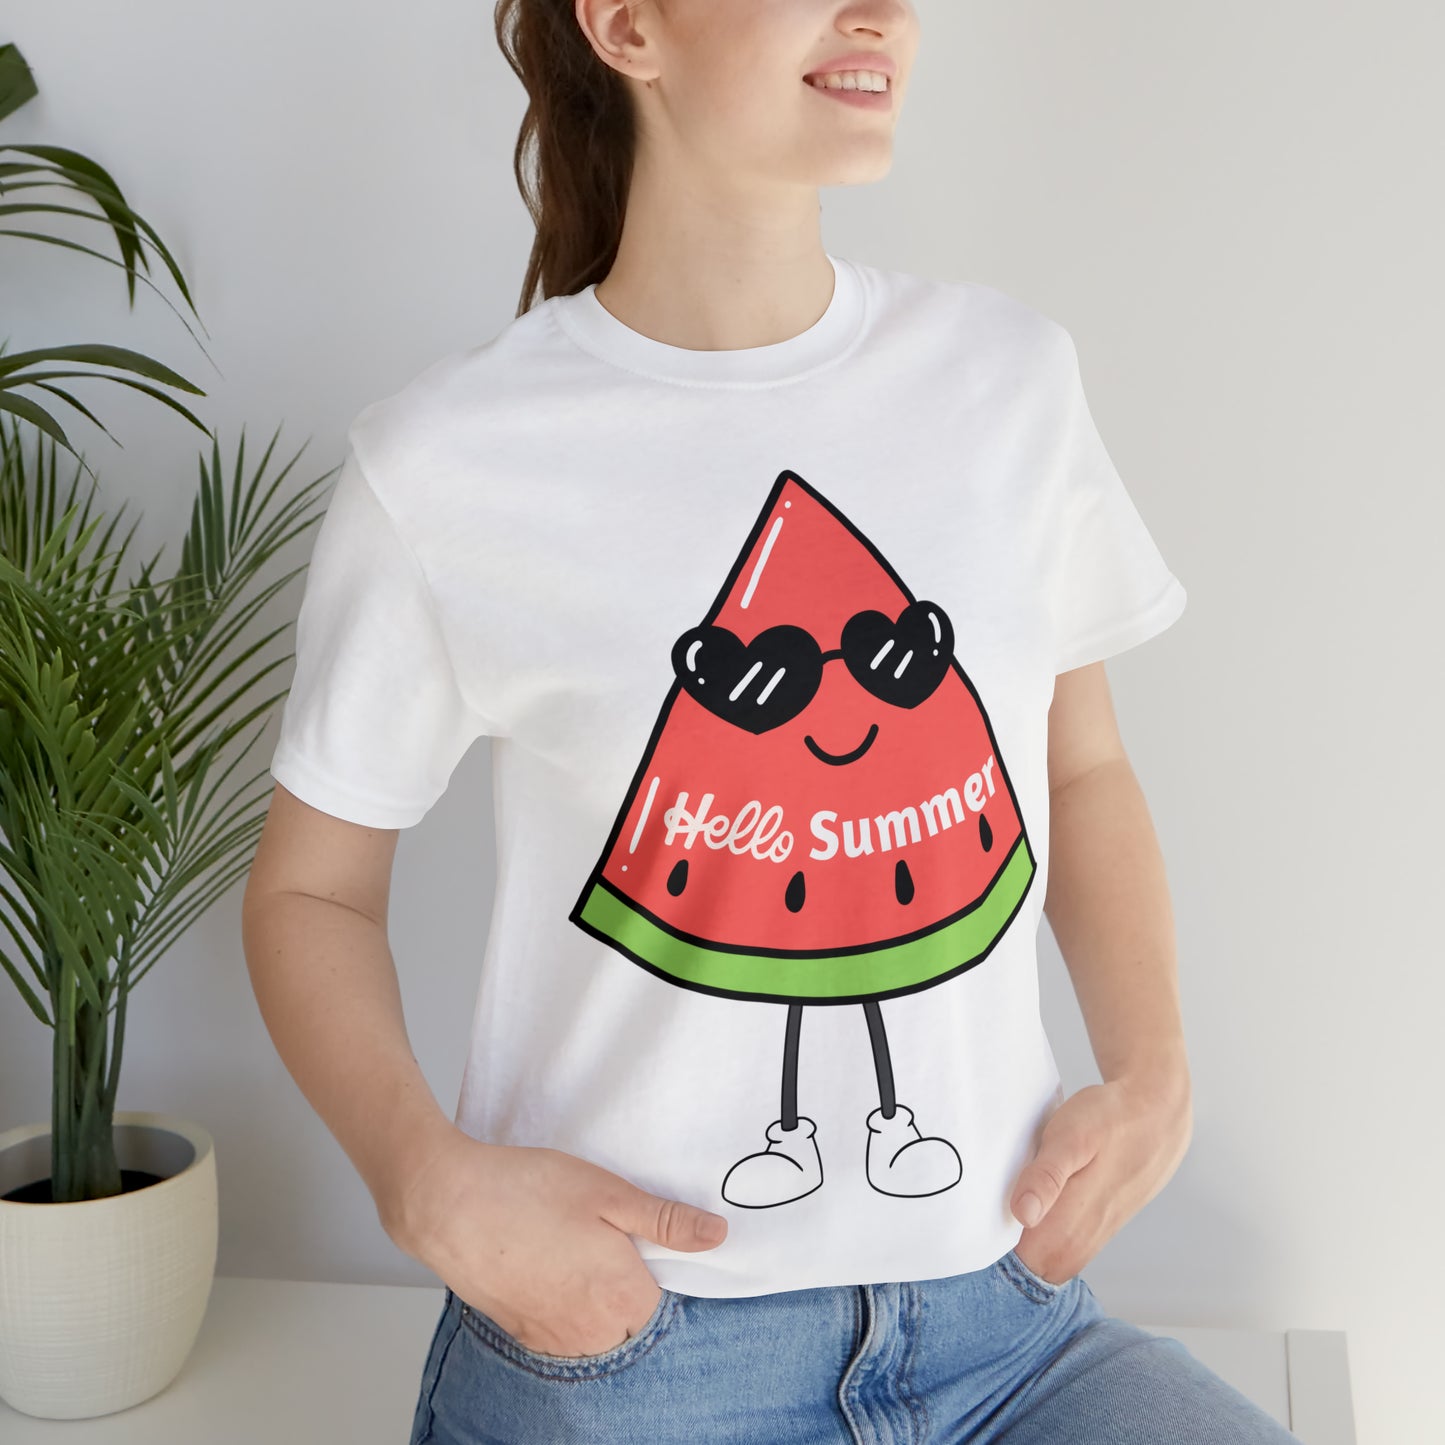 Funny Hello Summer Shirt, Summer shirts for women and men, Summer Casual Top Tee